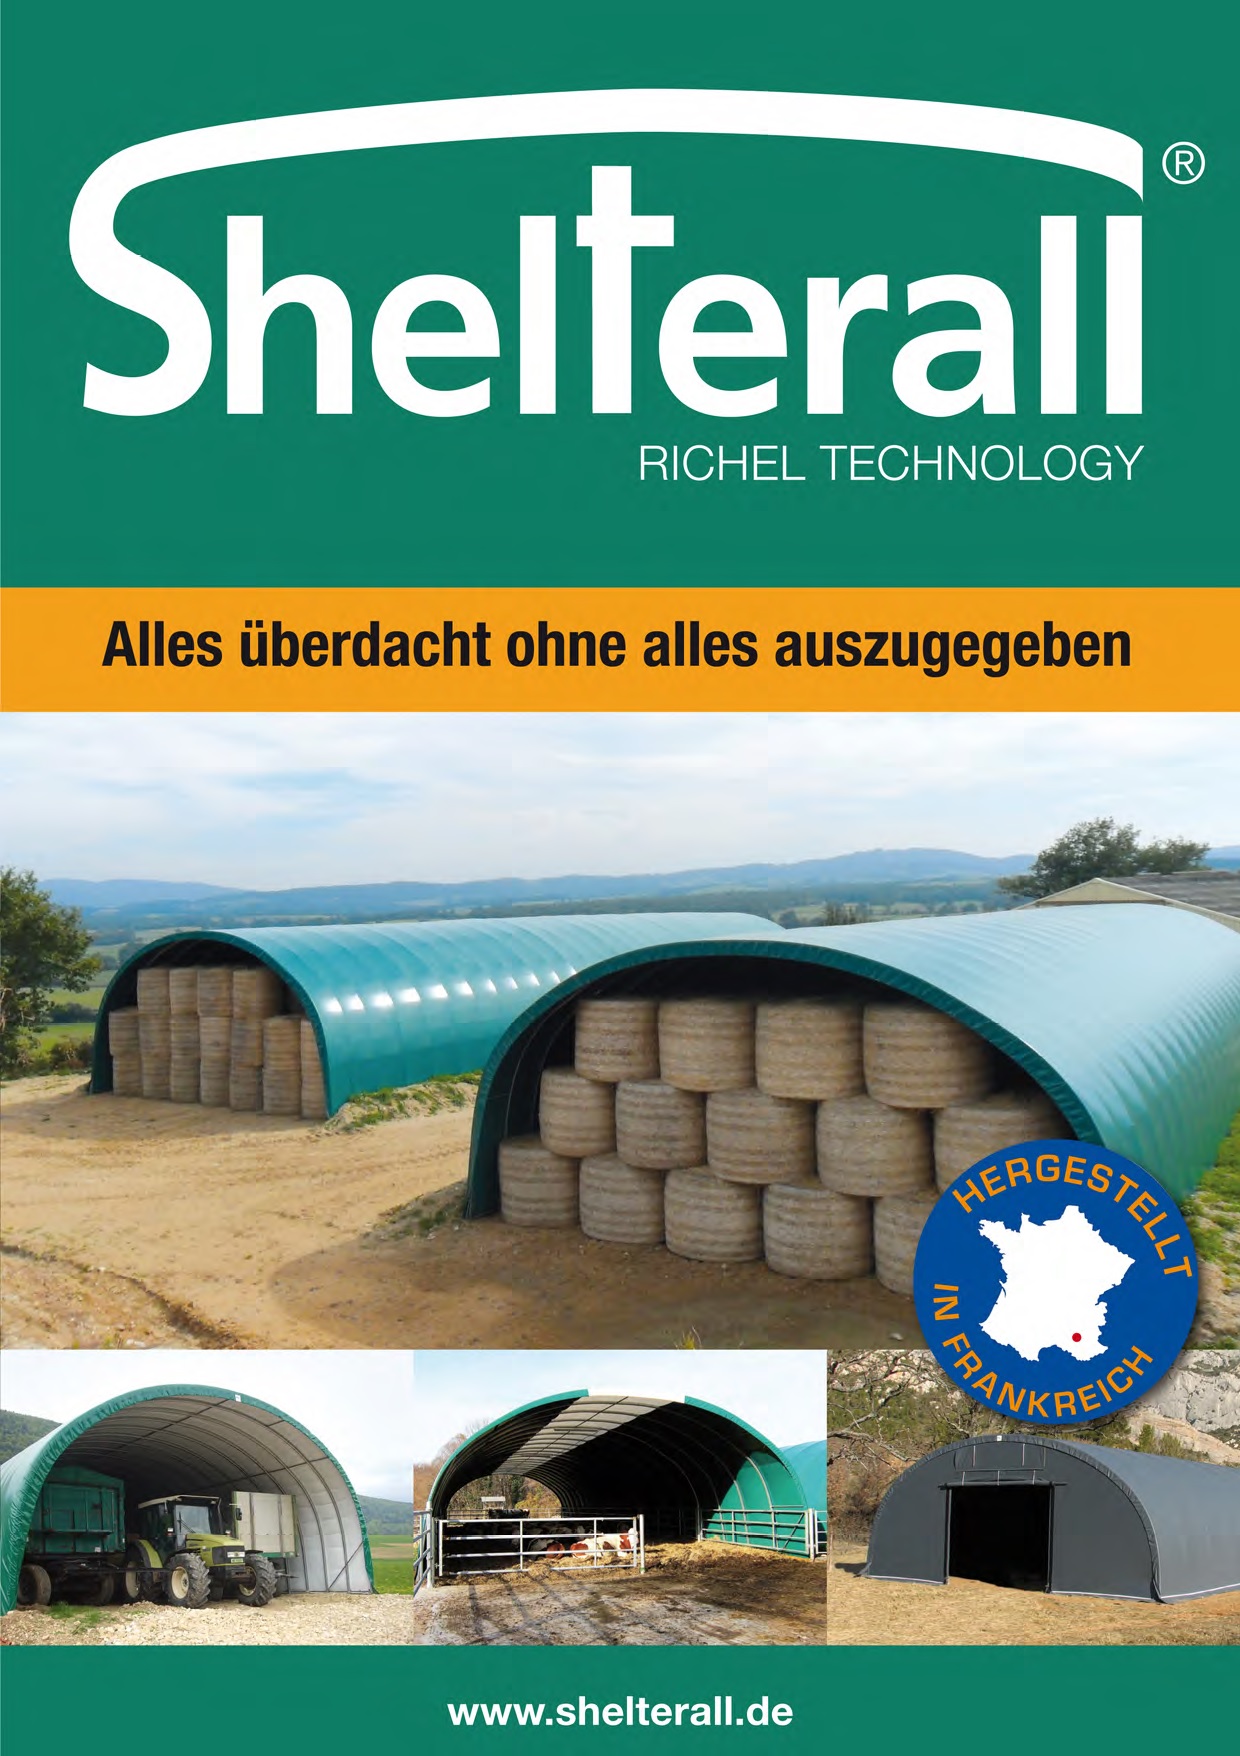 Shelterall